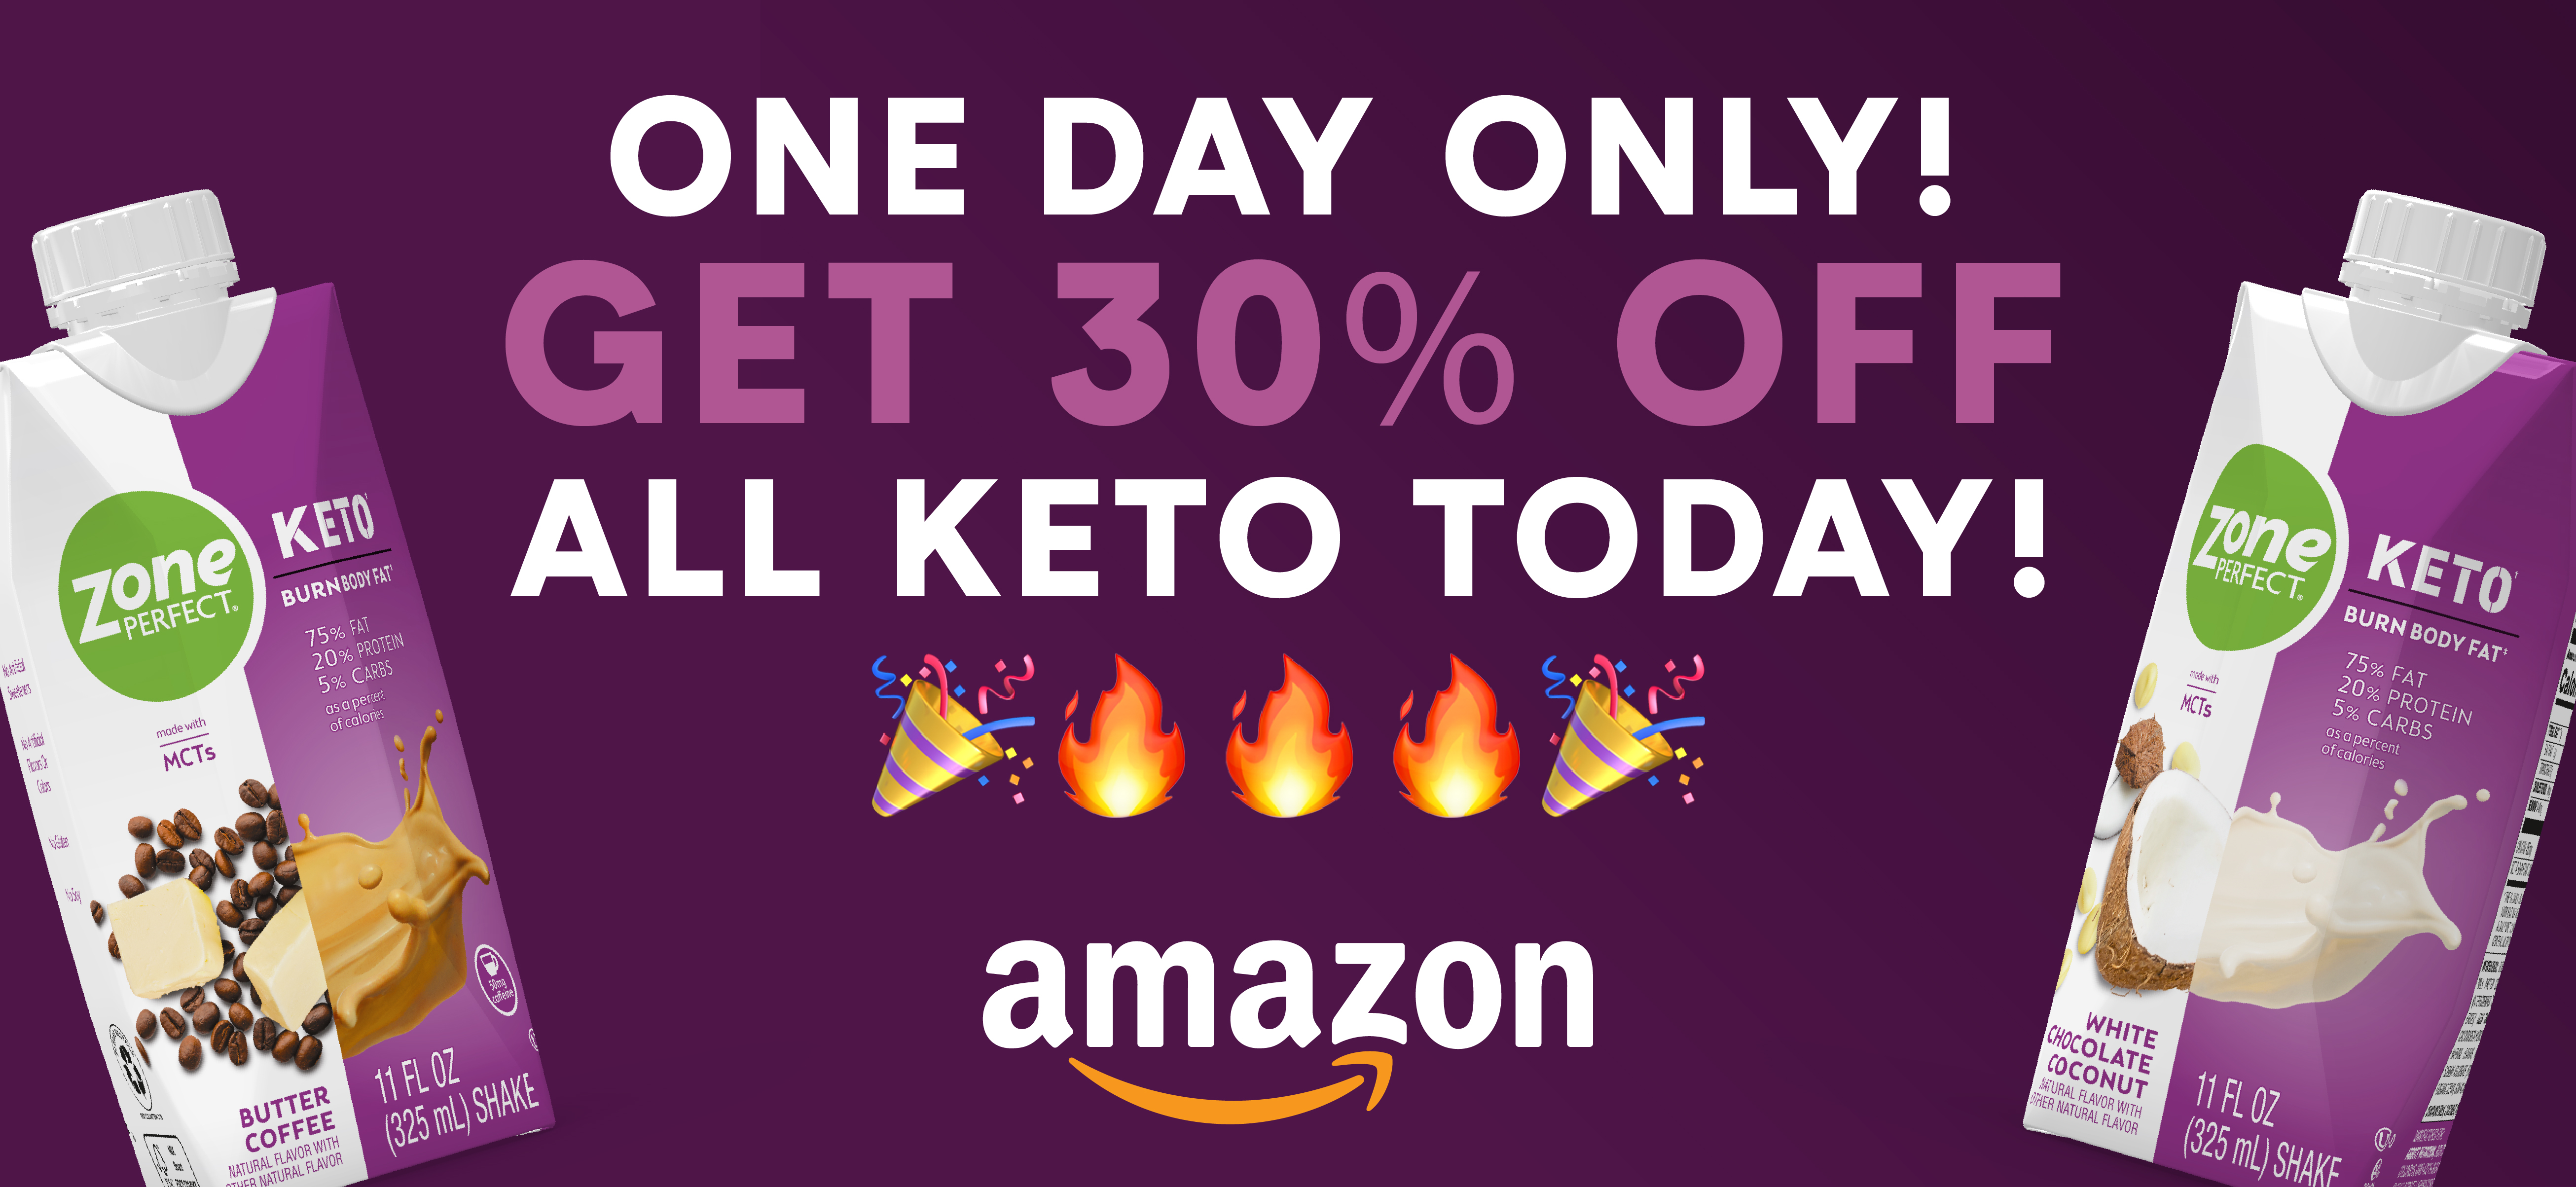 ONE DAY ONLY! Get 30% off all Keto TODAY!